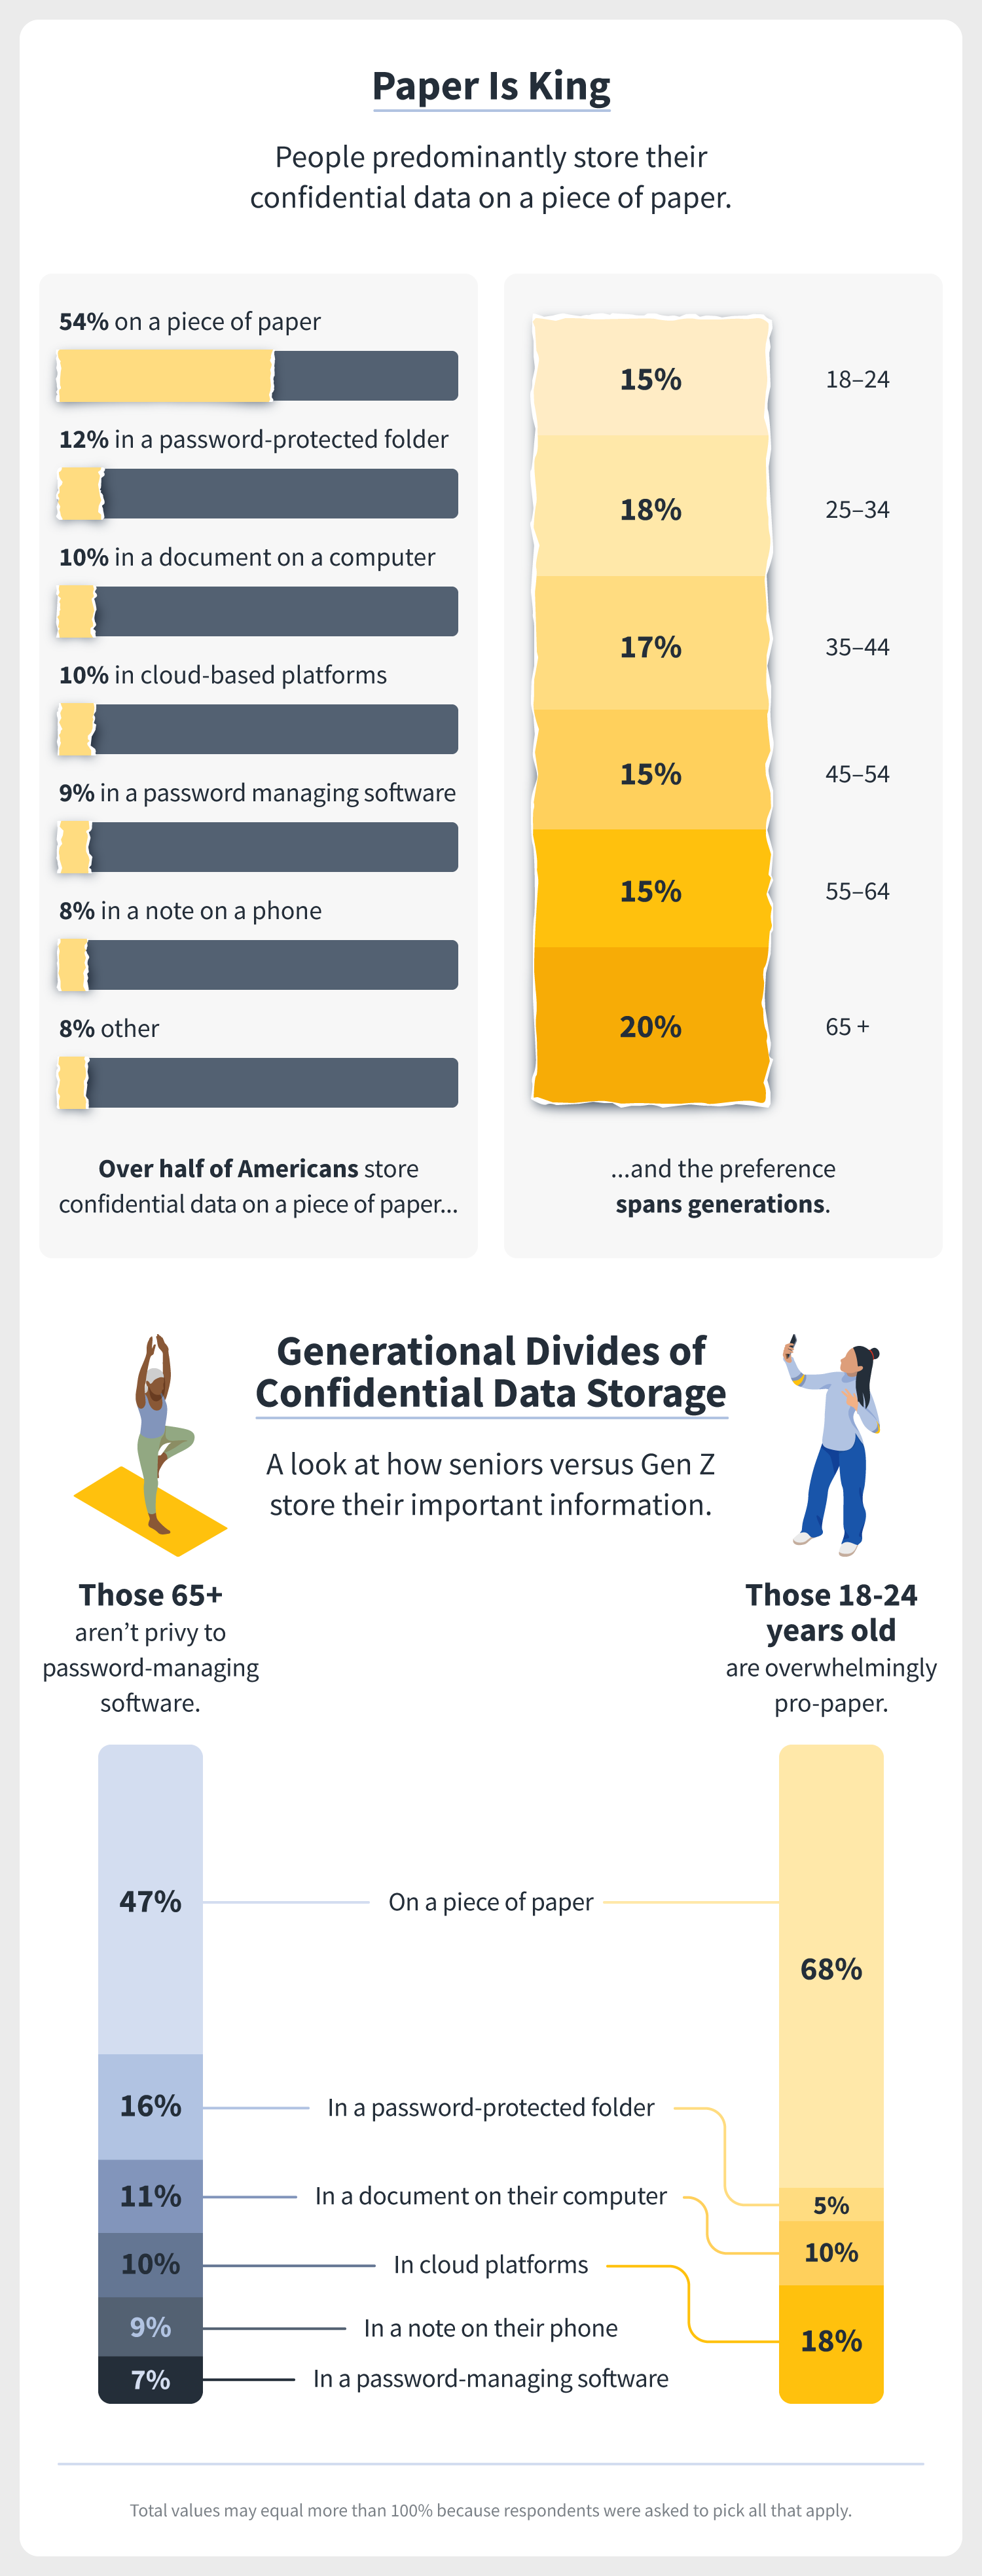 an overview of Norton’s confidential data survey results and the finding that 54 percent of people store their confidential data on a piece of paper over digital platforms, including the cloud